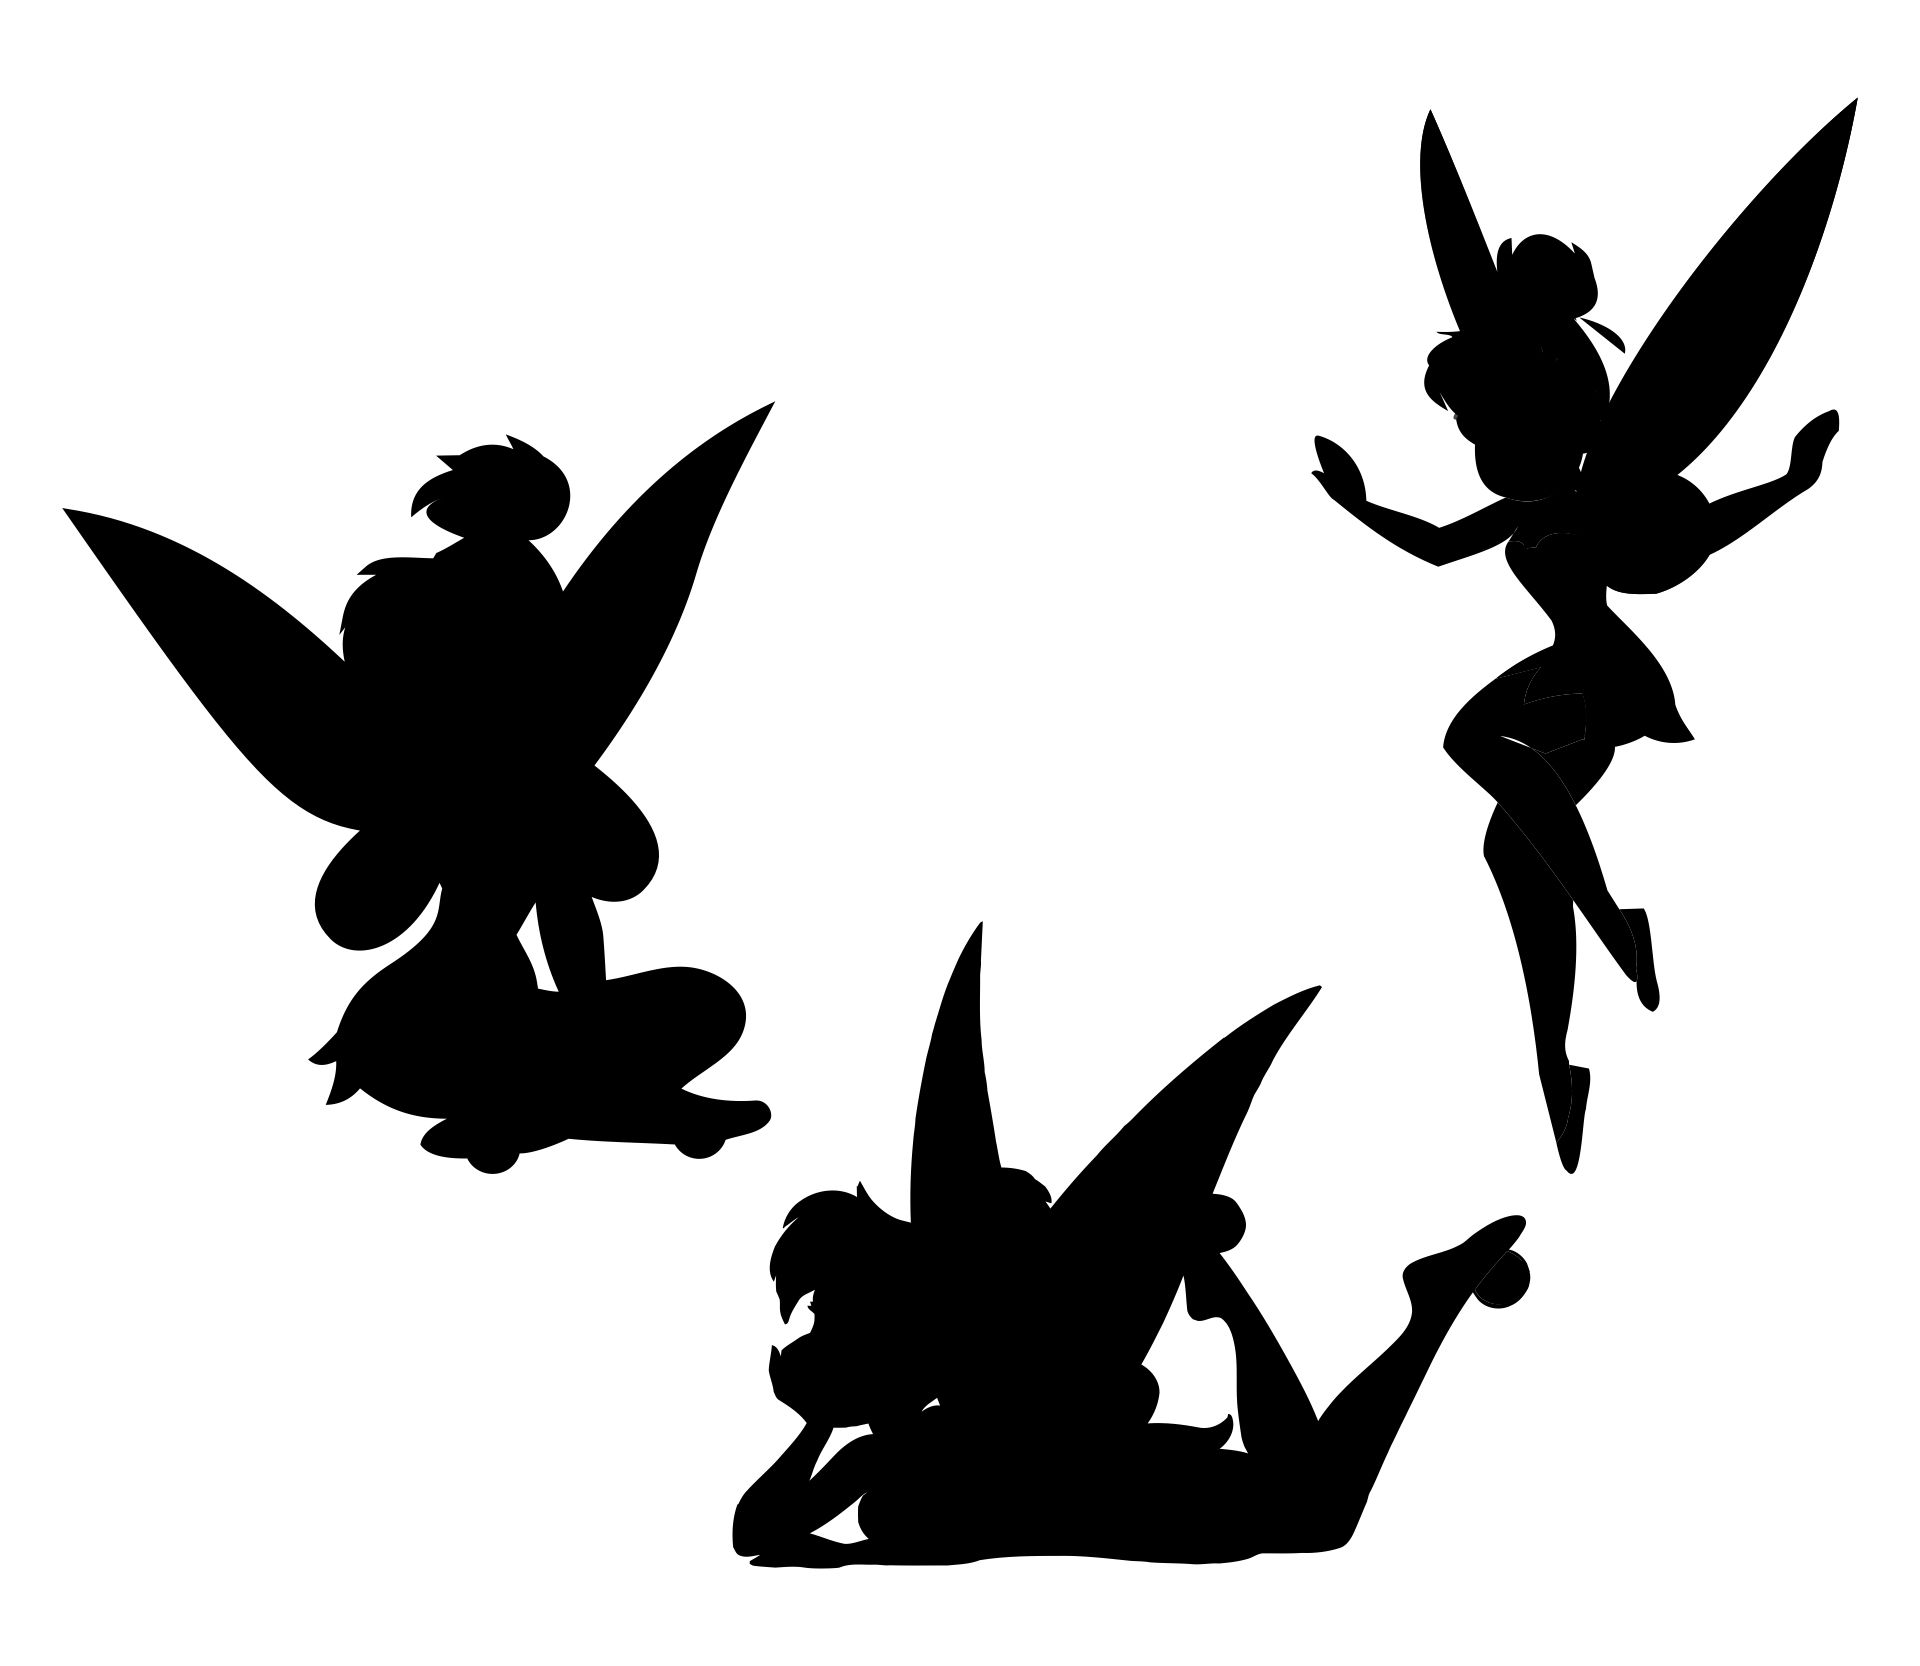 Printable Tinkerbell Silhouette - Customize and Print